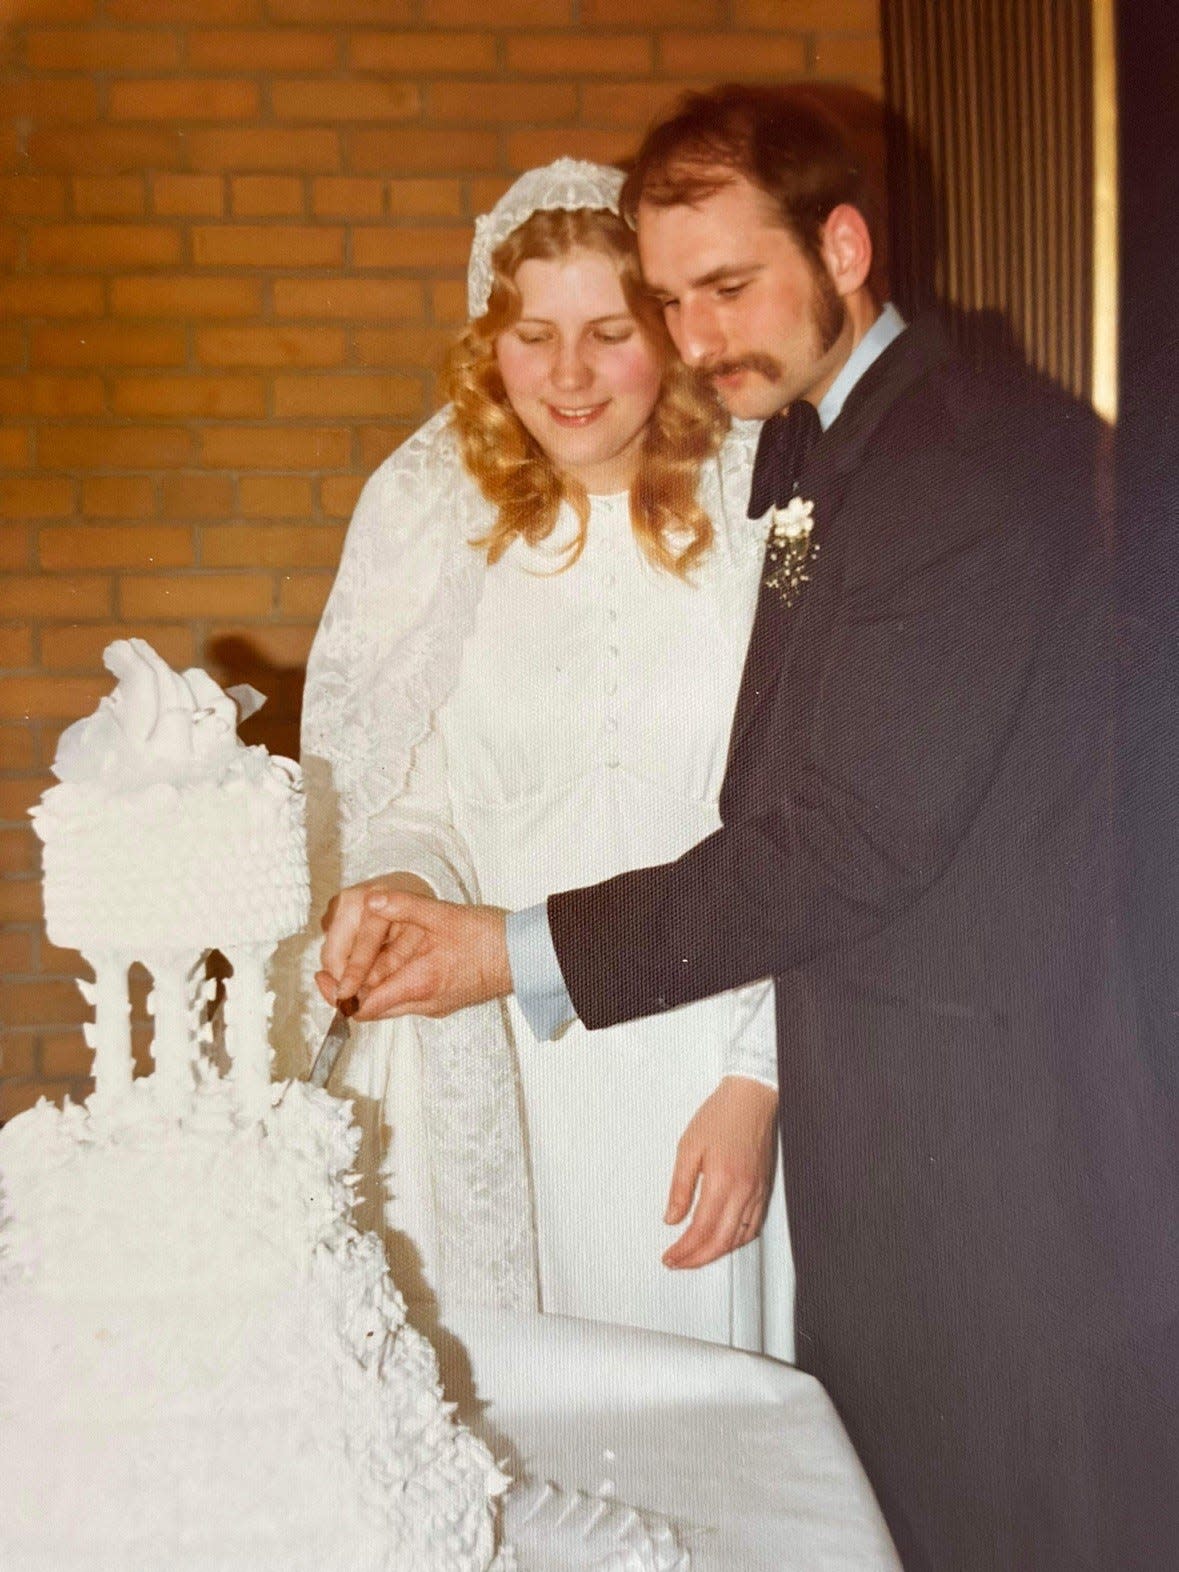 The couple in 1974.